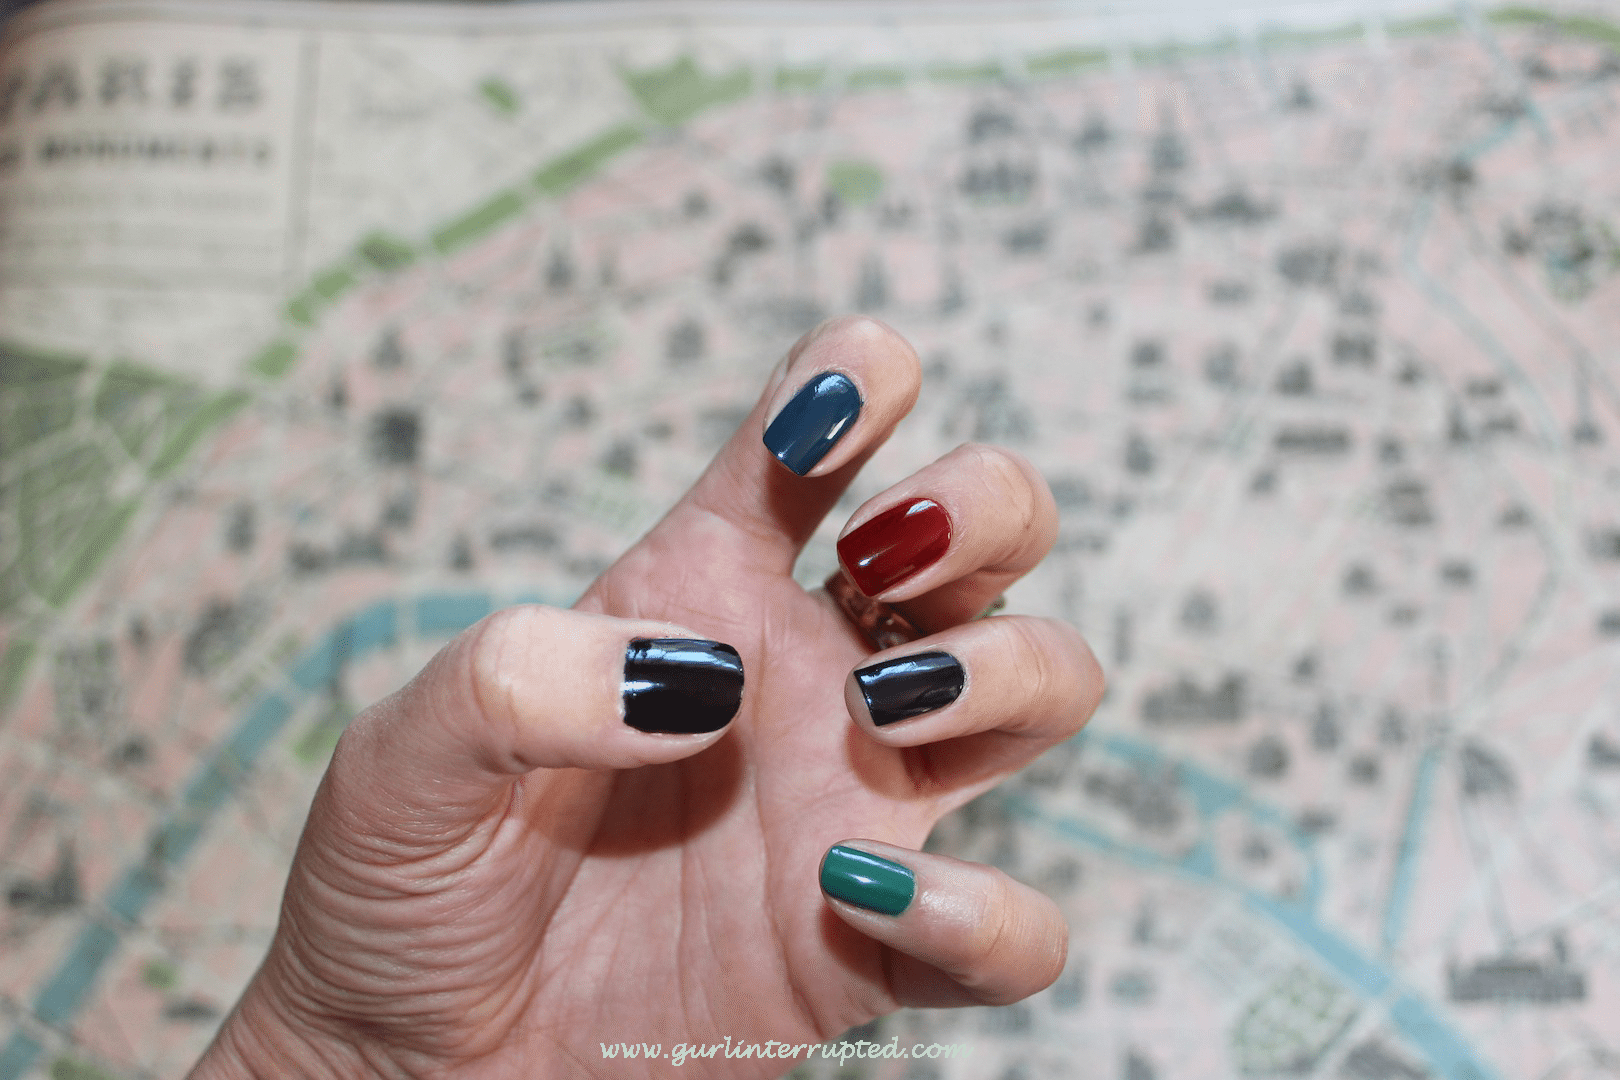 Bejewelled Nails and Jewel Tones Manicure, nails, nail polish, nail art, nail design, OPI, OPI Nail Polish NZ, beauty, beauty blog nz, fashion blog nz, style blog nz, angie fredatovich, gurlinterrupted, girl interrupted, jewels, accessories nz